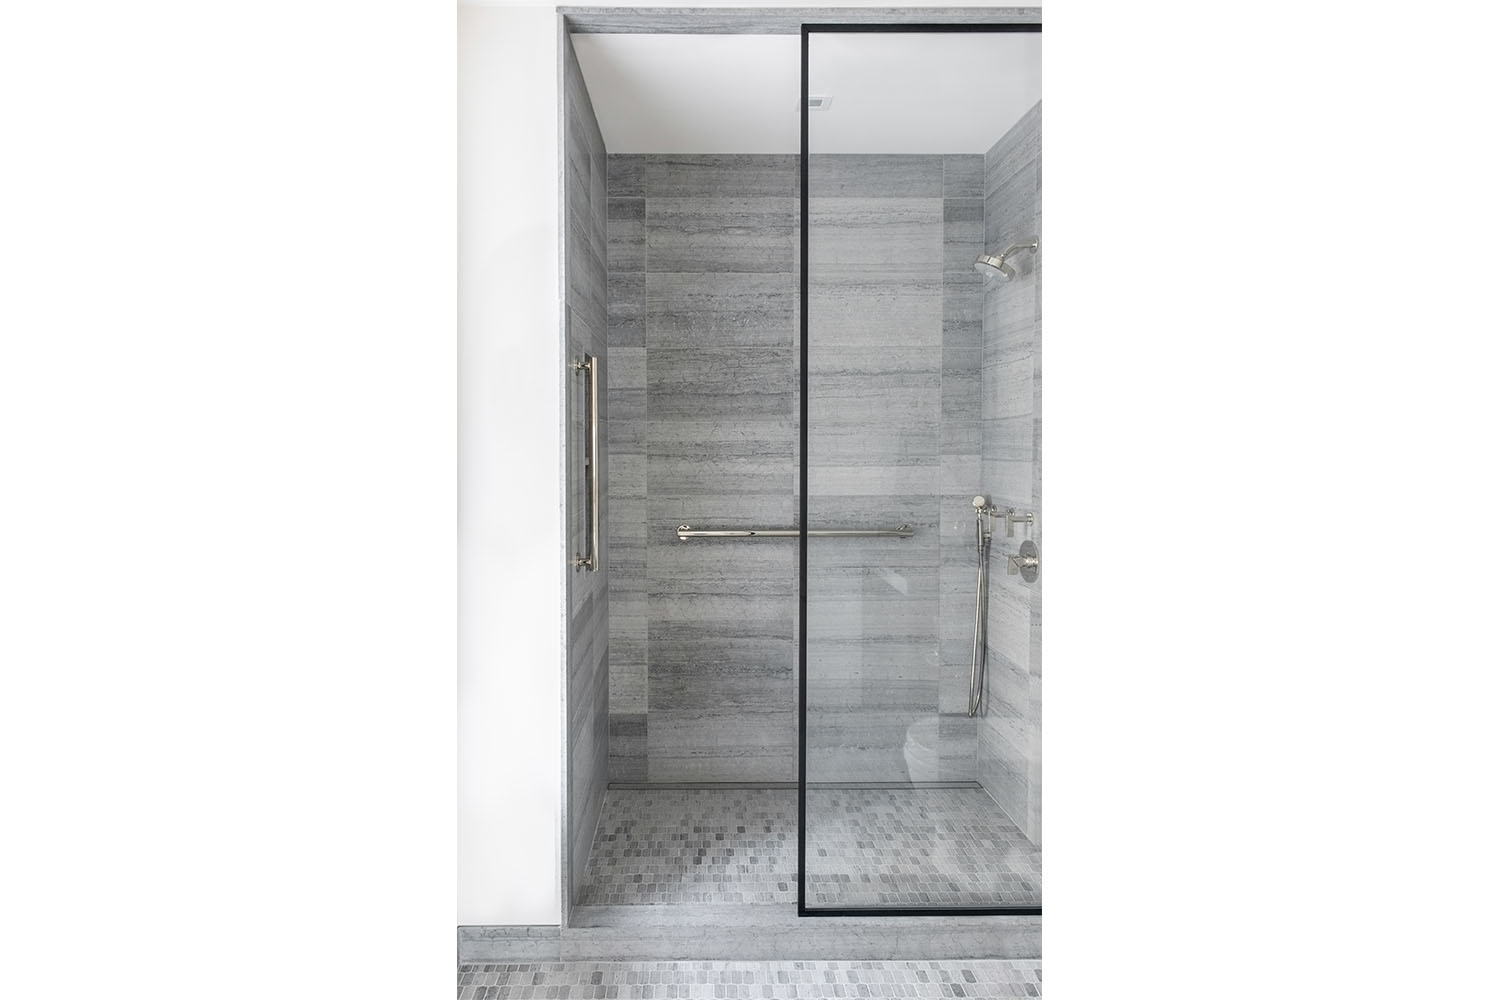 Luxury Residential Home Construction - Drake Tower Chicago bathroom shower detail